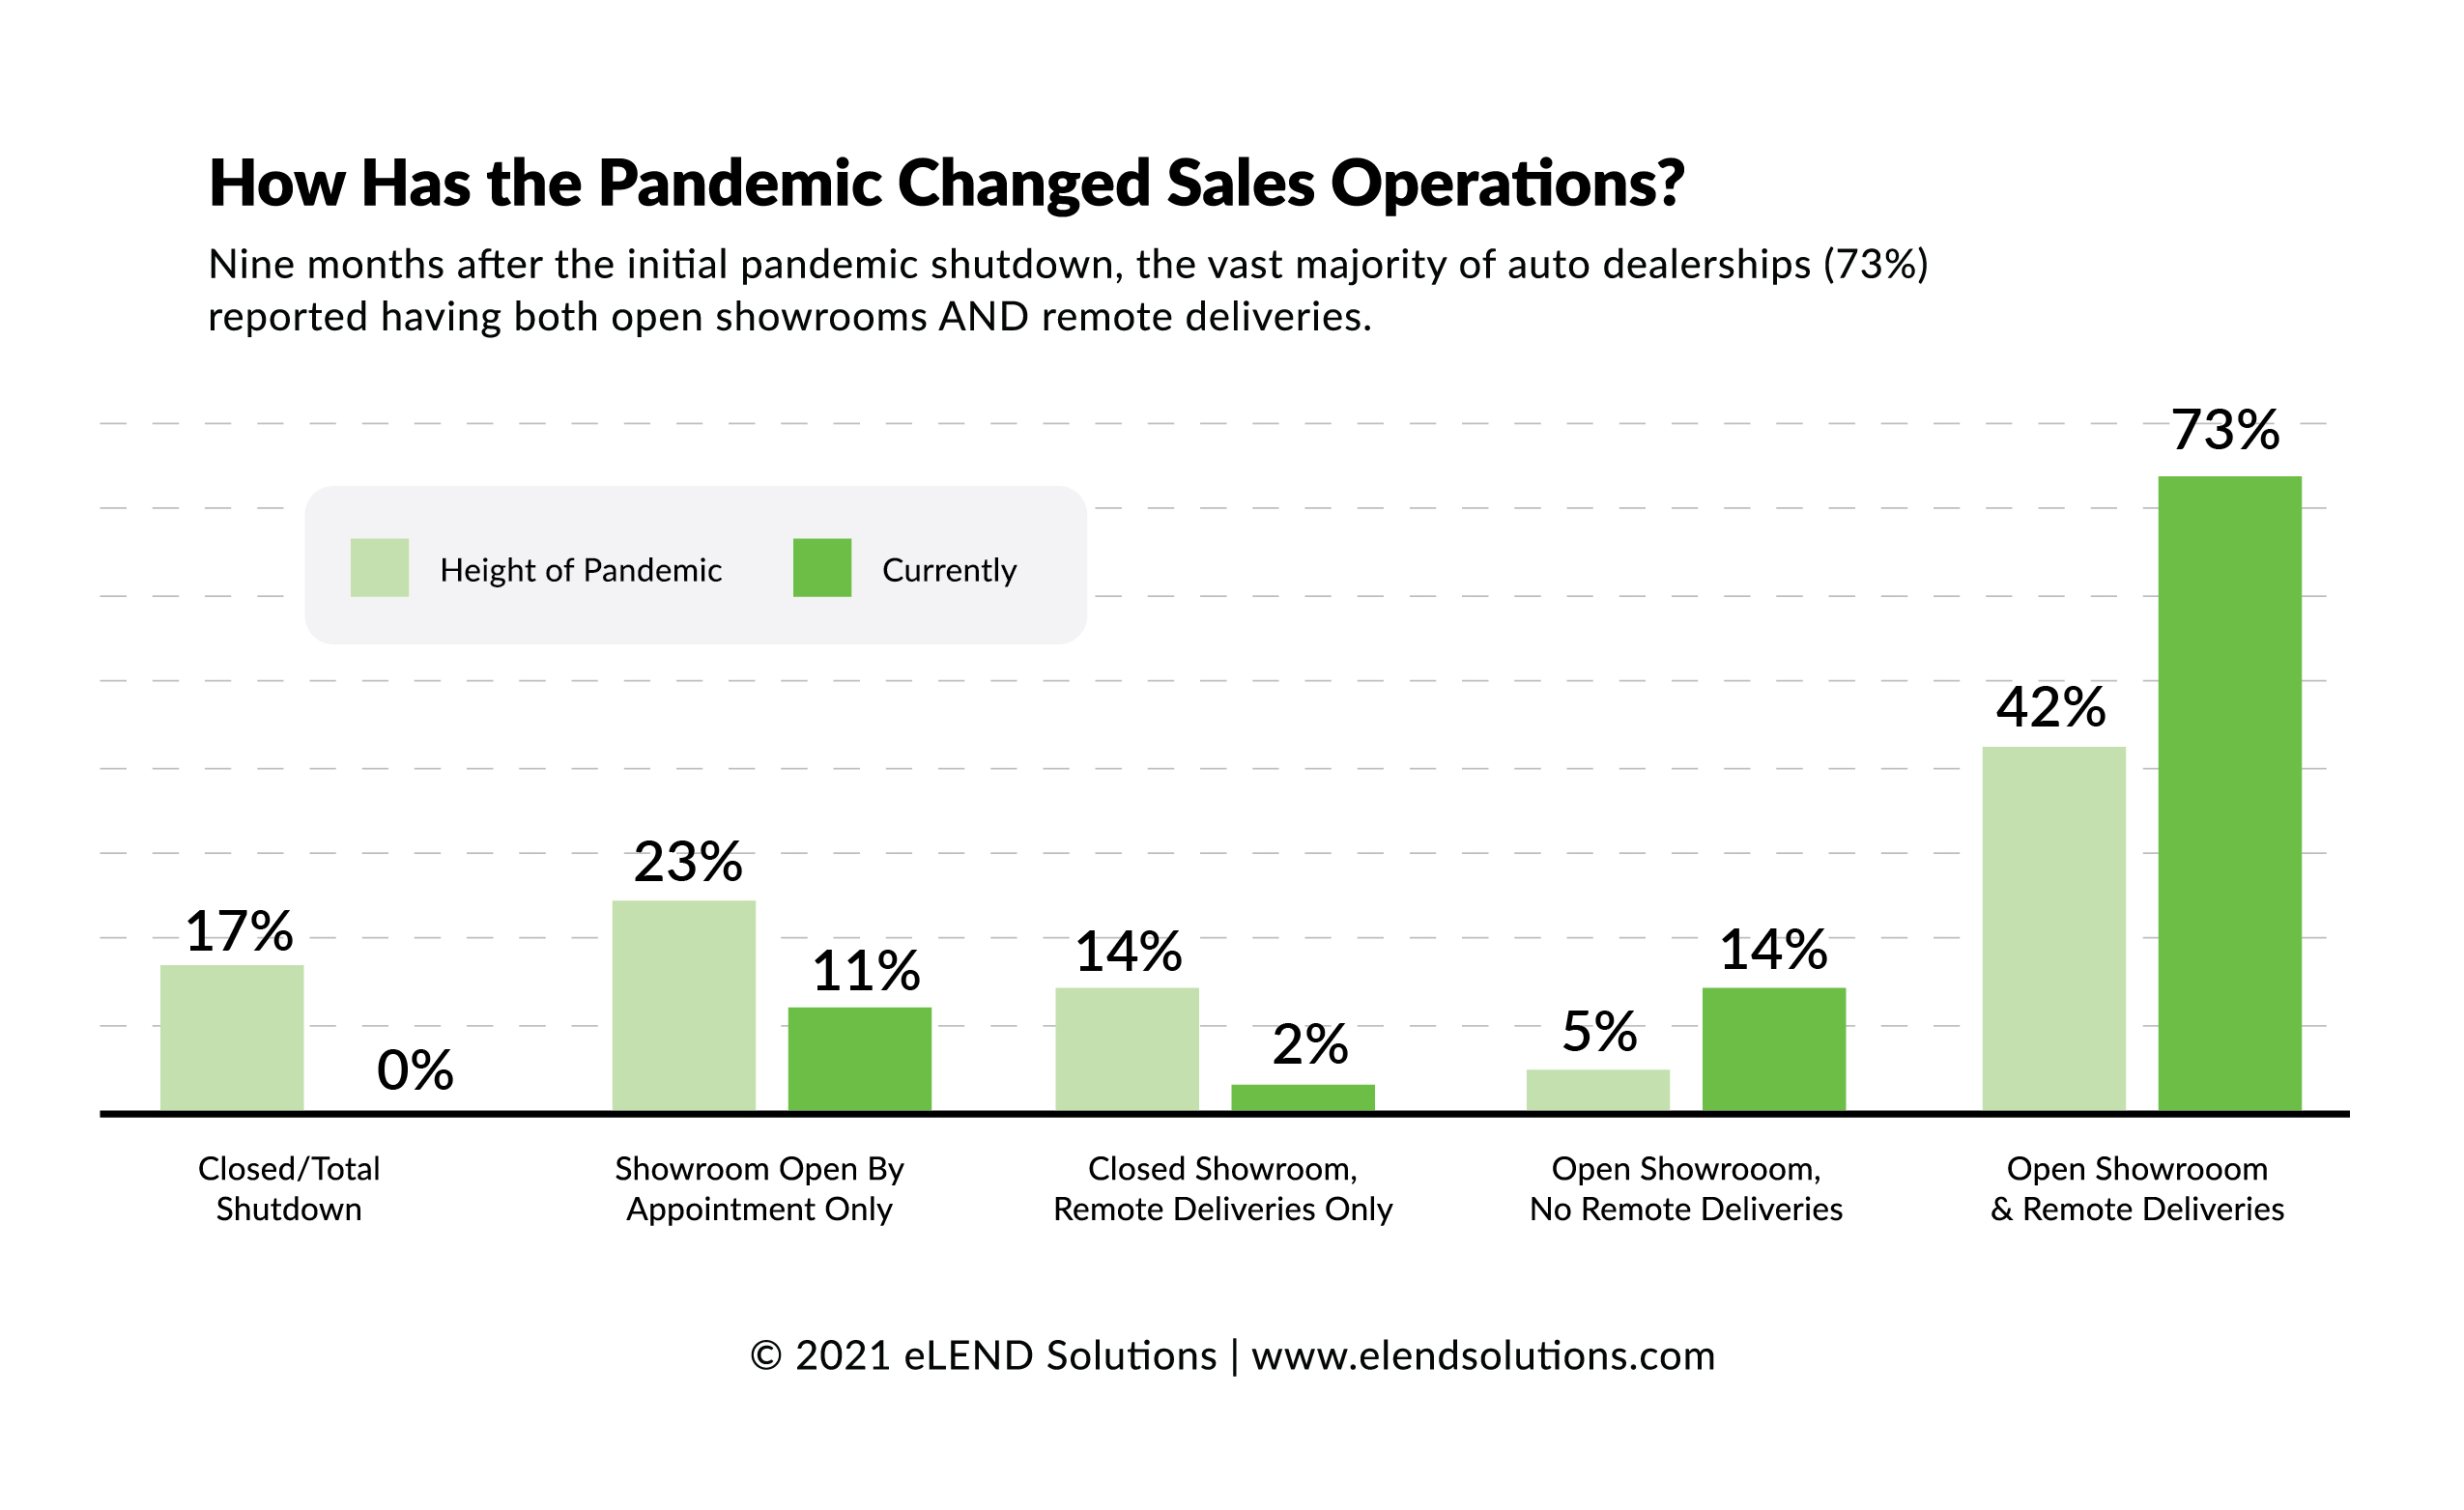 How Has the Pandemic Changed Sales Operations?